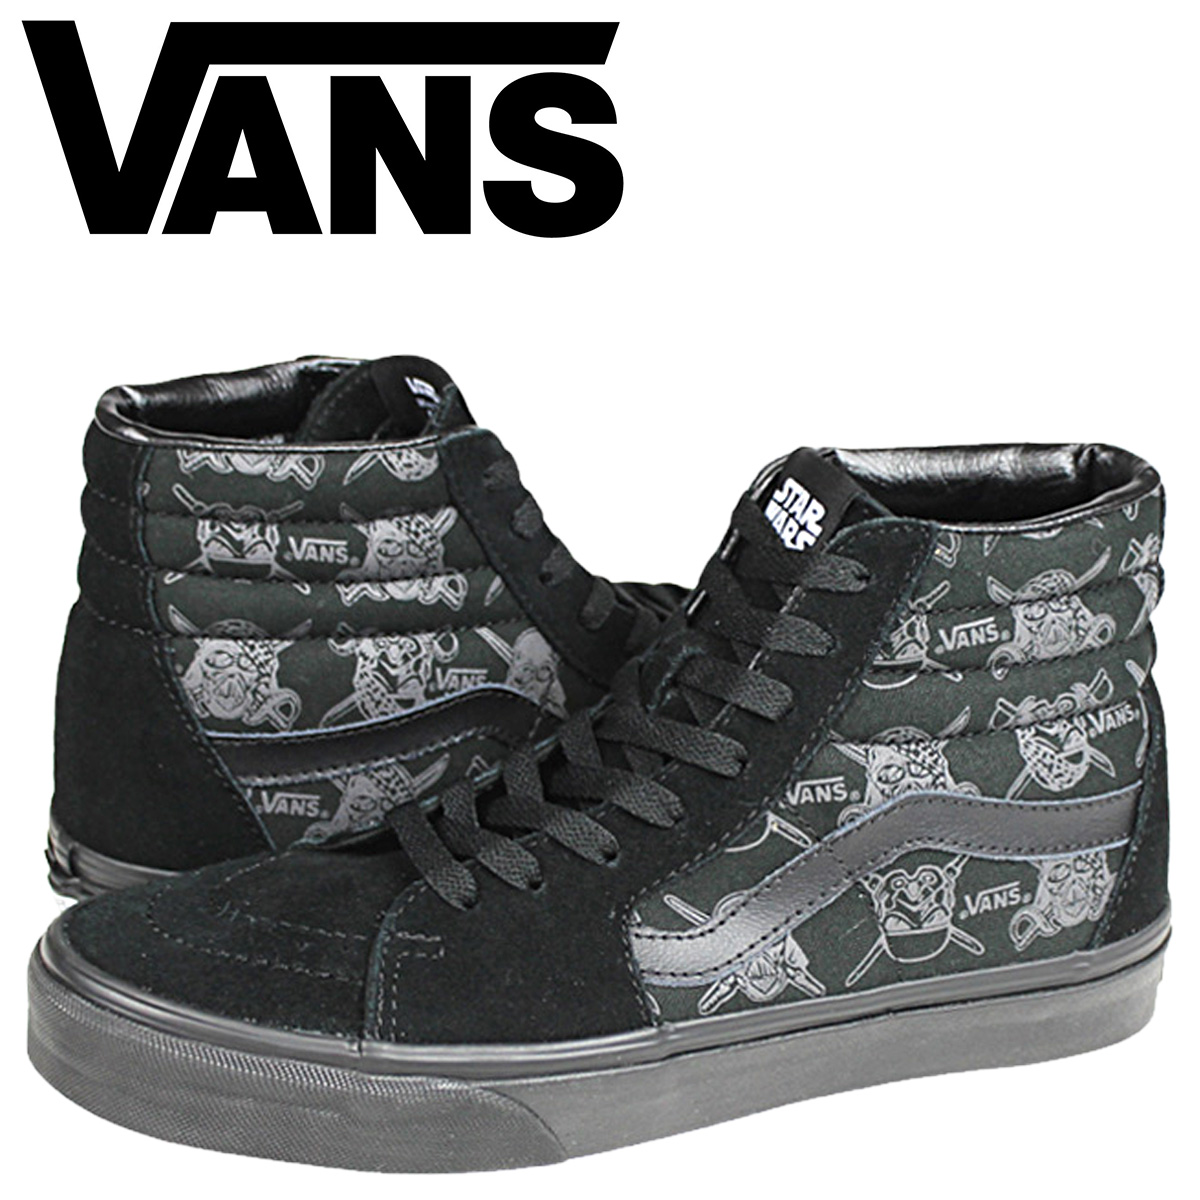 vans shop online Cheaper Than Retail Price\u003e Buy Clothing, Accessories and  lifestyle products for women \u0026 men -